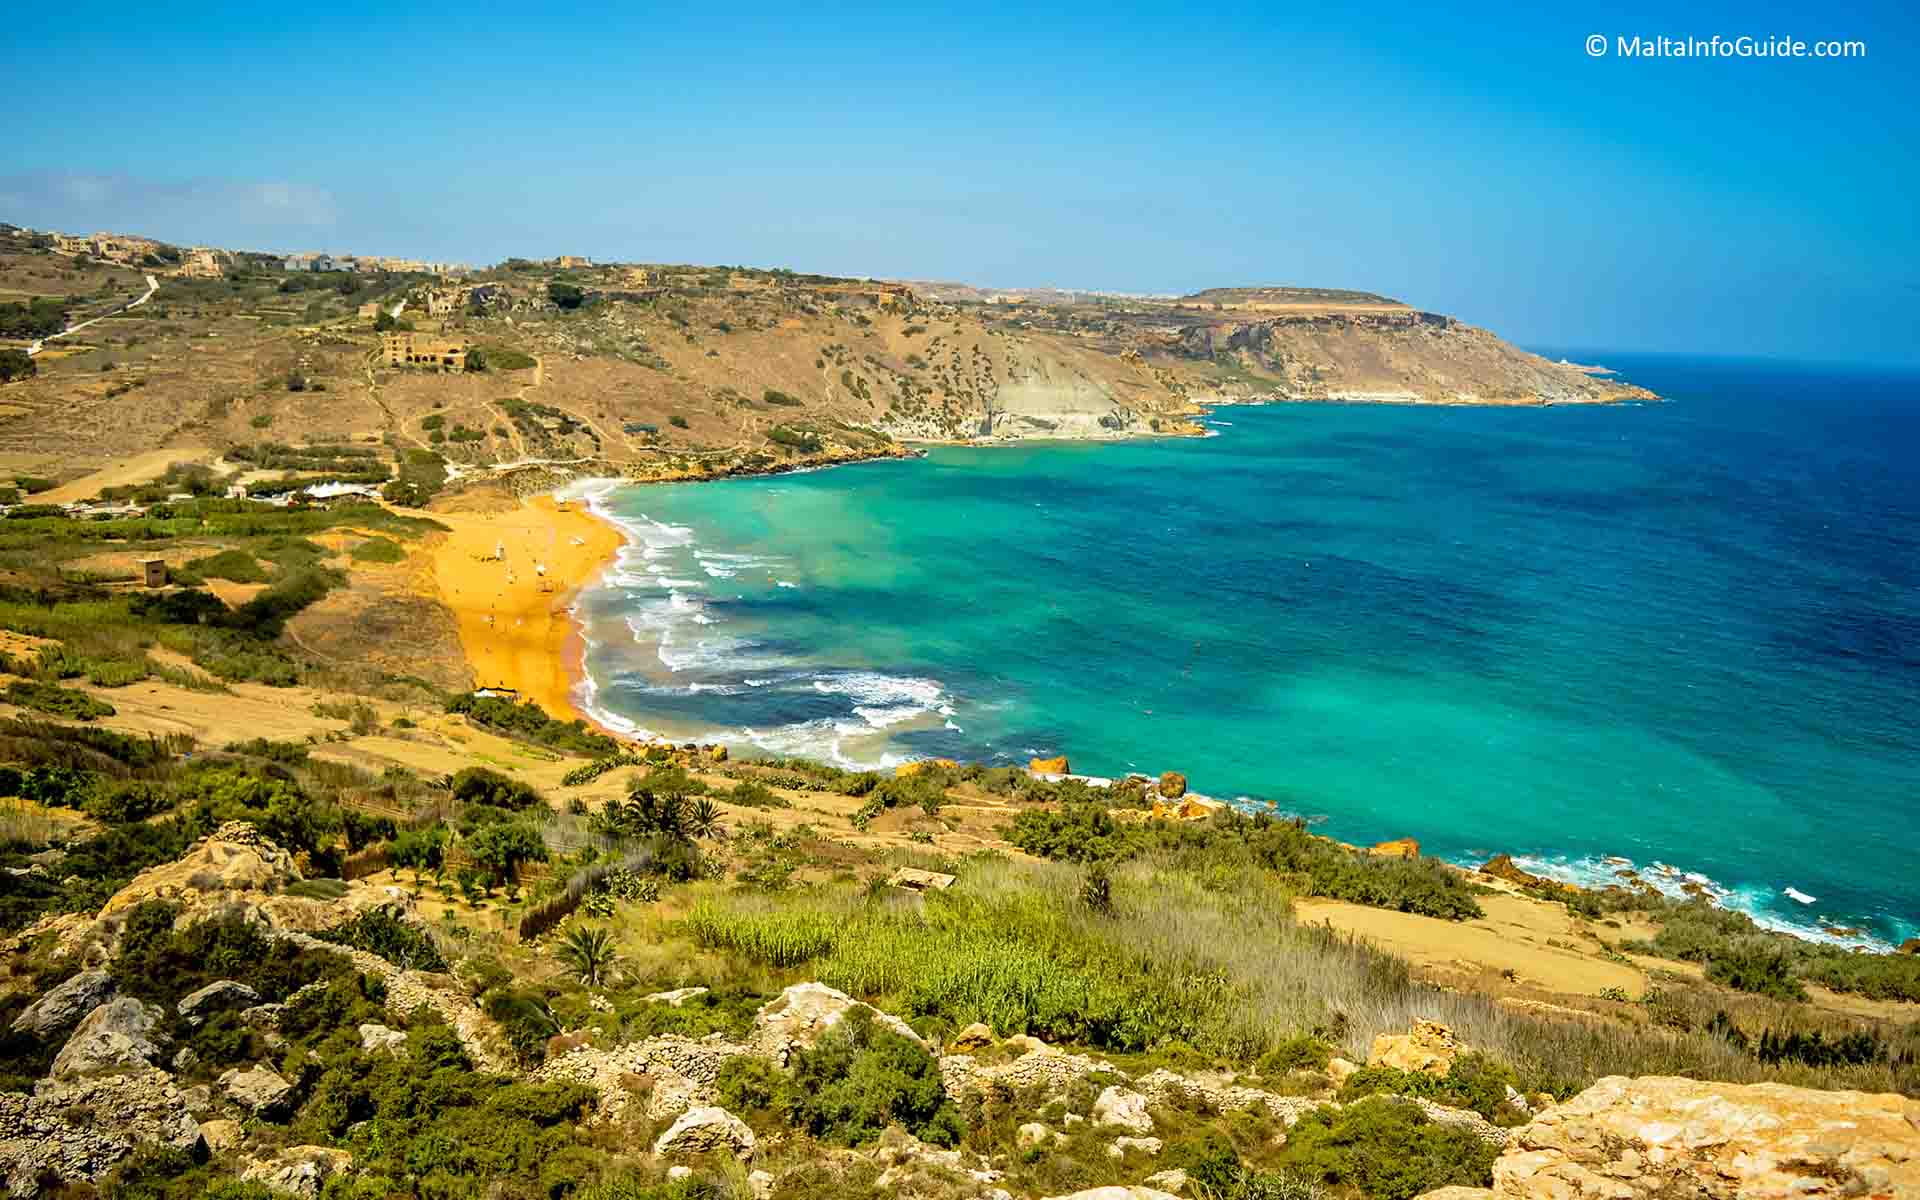 A view of Ramla Bay from Mixta Cave Gozo.